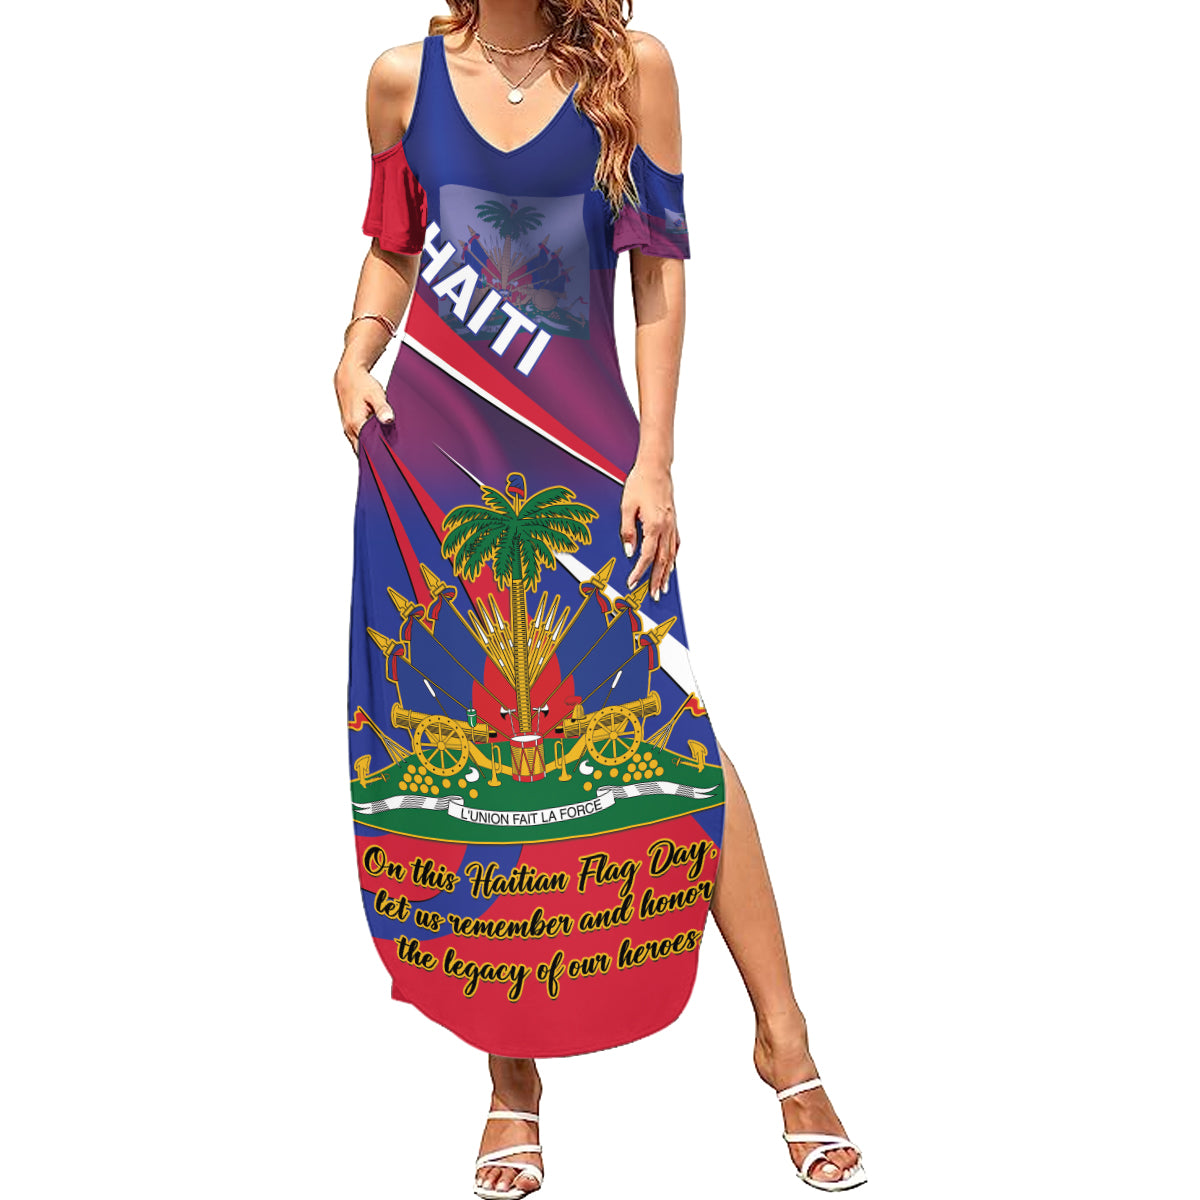 Personalised Haiti Flag Day Summer Maxi Dress Lest Us Remember Our Heroes